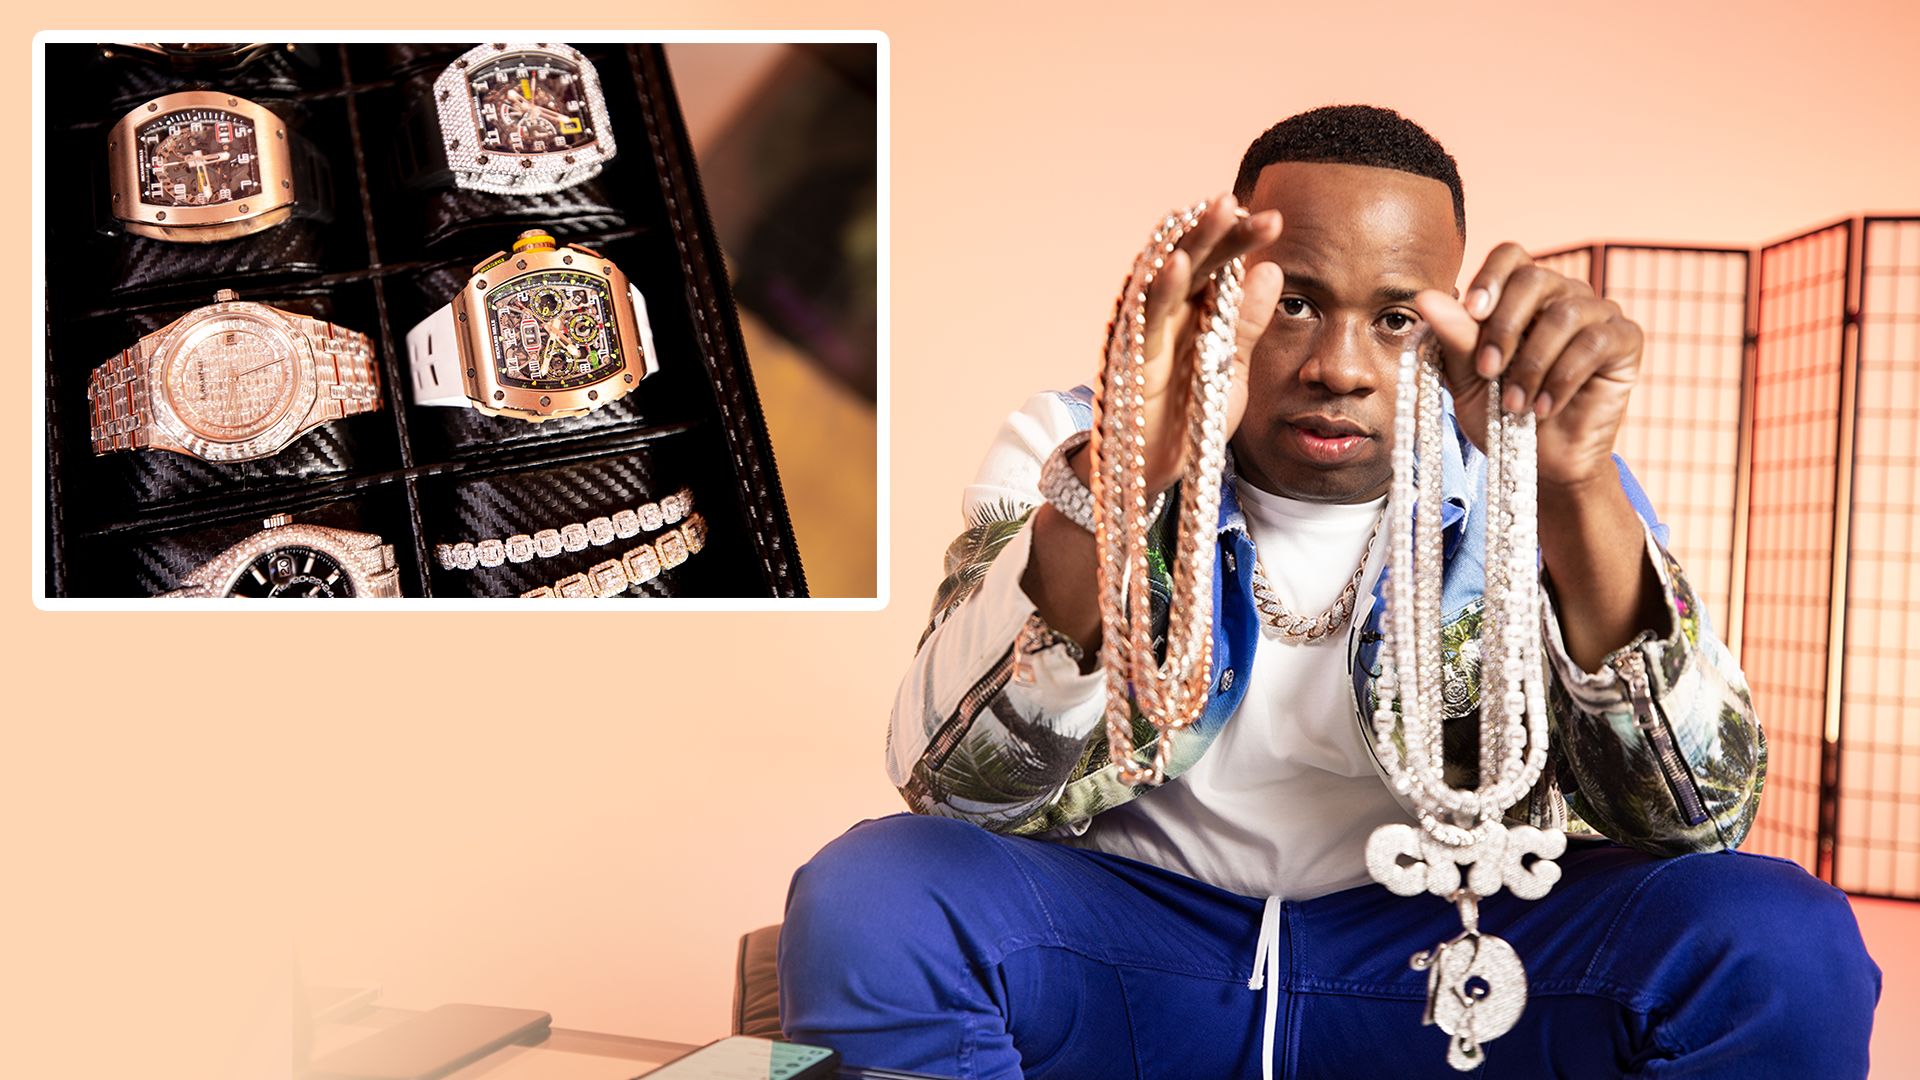 Moneybagg Yo OUTFITS IN See Wat I'm Sayin VIDEO [RAPPERS OUTFITS] 